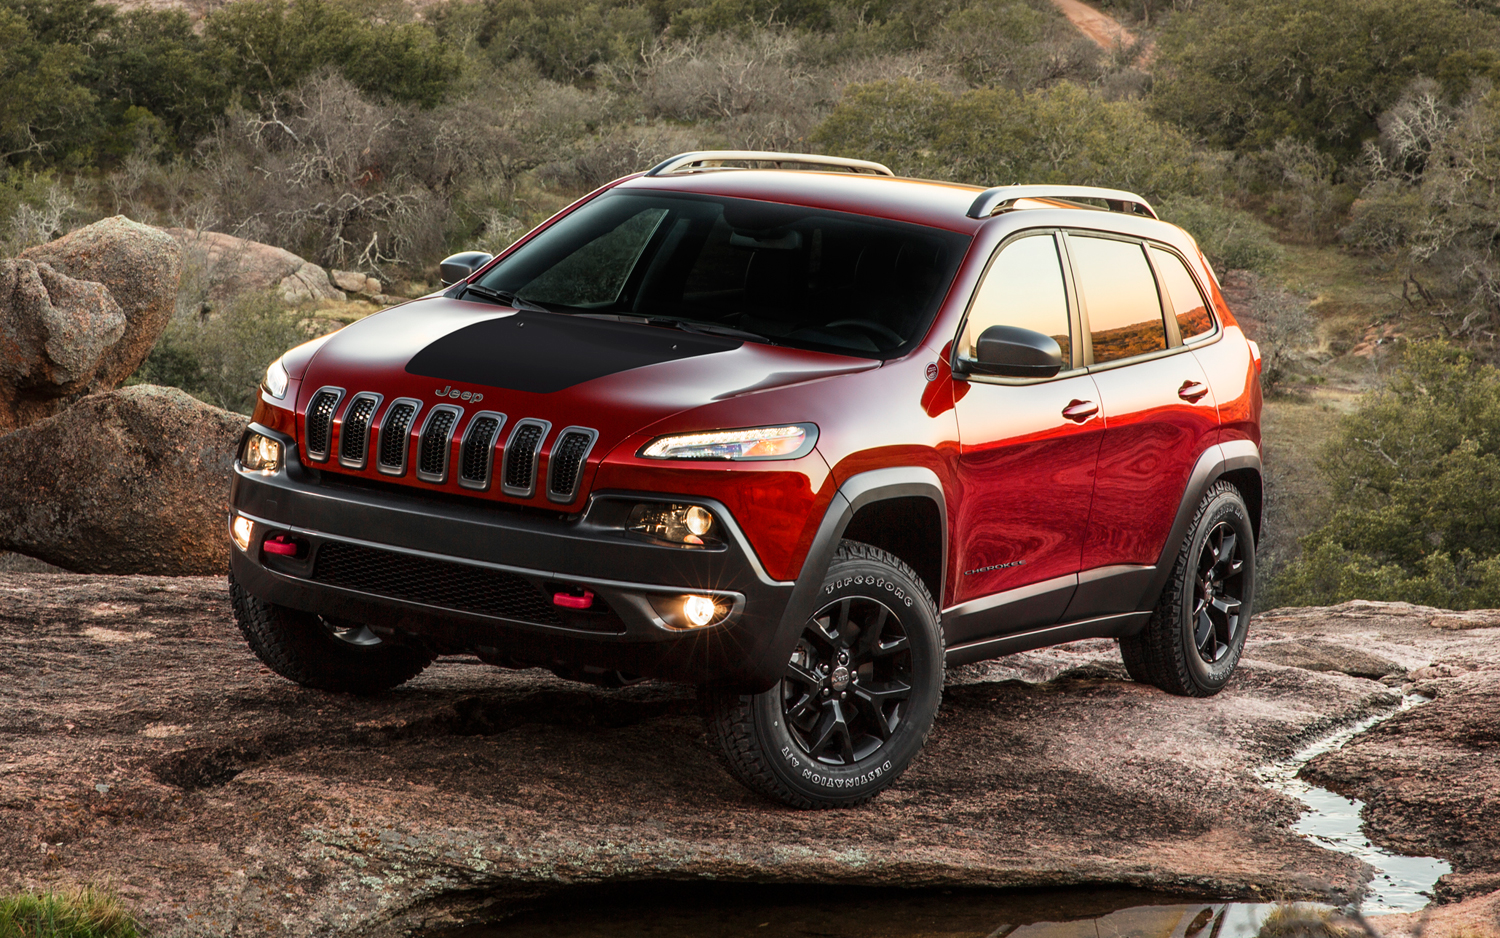 2014 Jeep Cherokee Picture HD Wallpaper For Your PC Dekstop